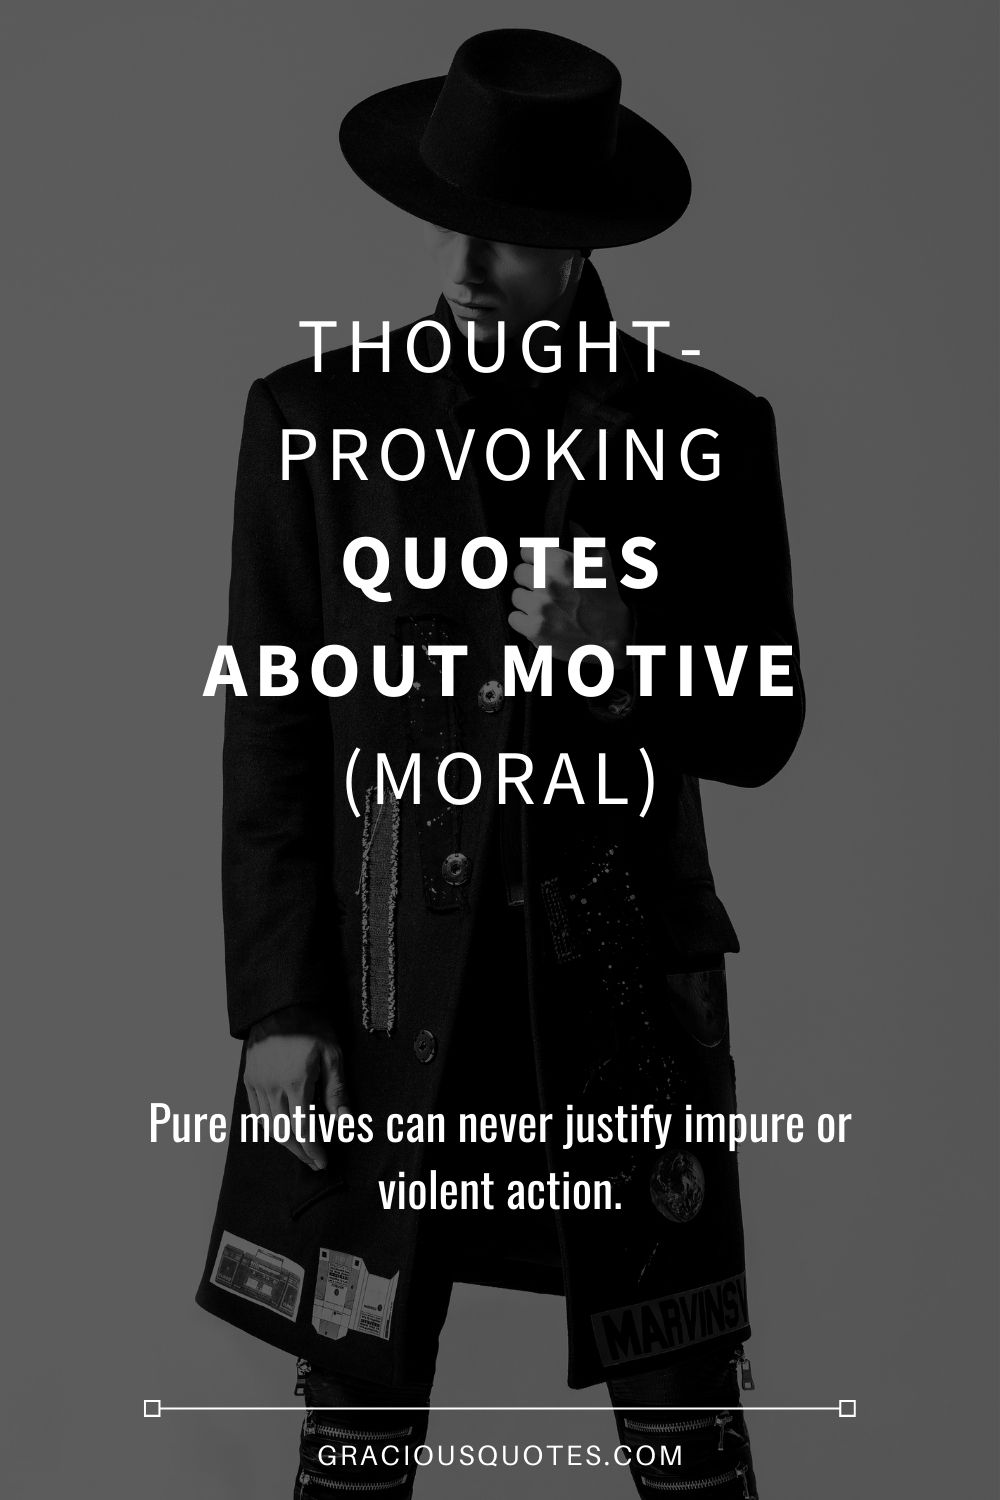 Thought-provoking Quotes About Motive (MORAL) - Gracious Quotes